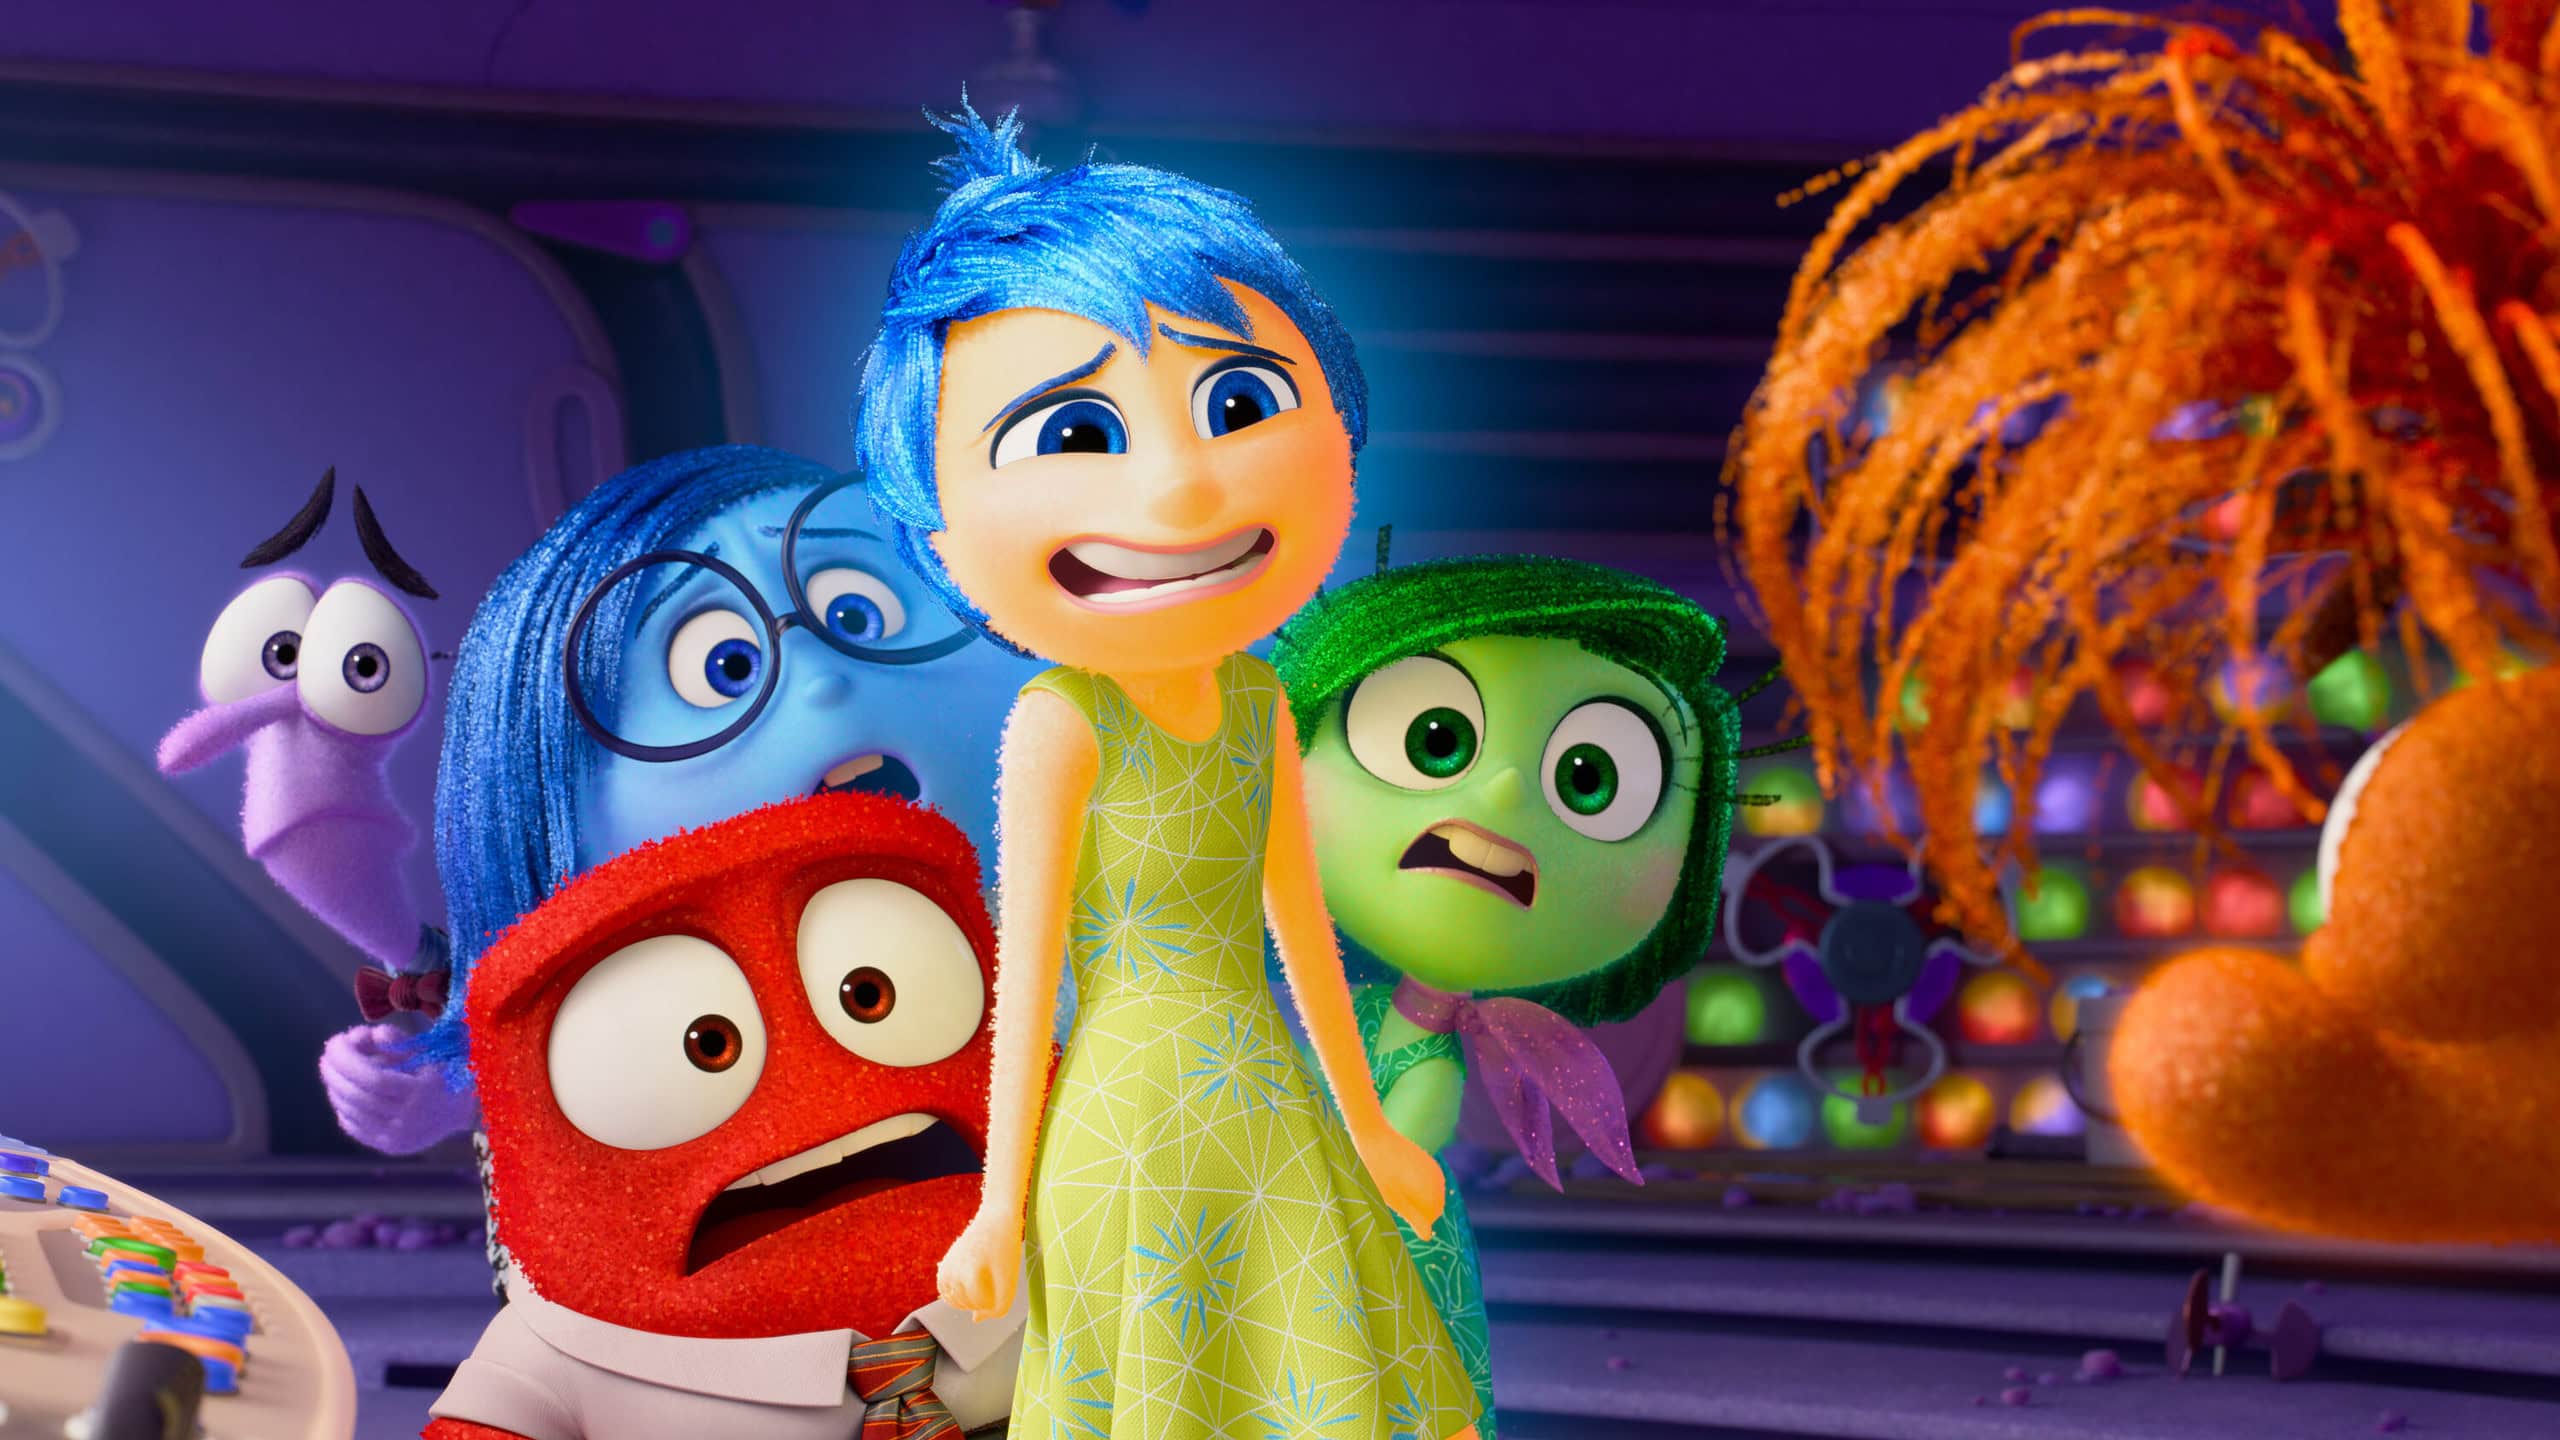 Research-Based Emotions Shape Adolescent Journey in Inside Out 2